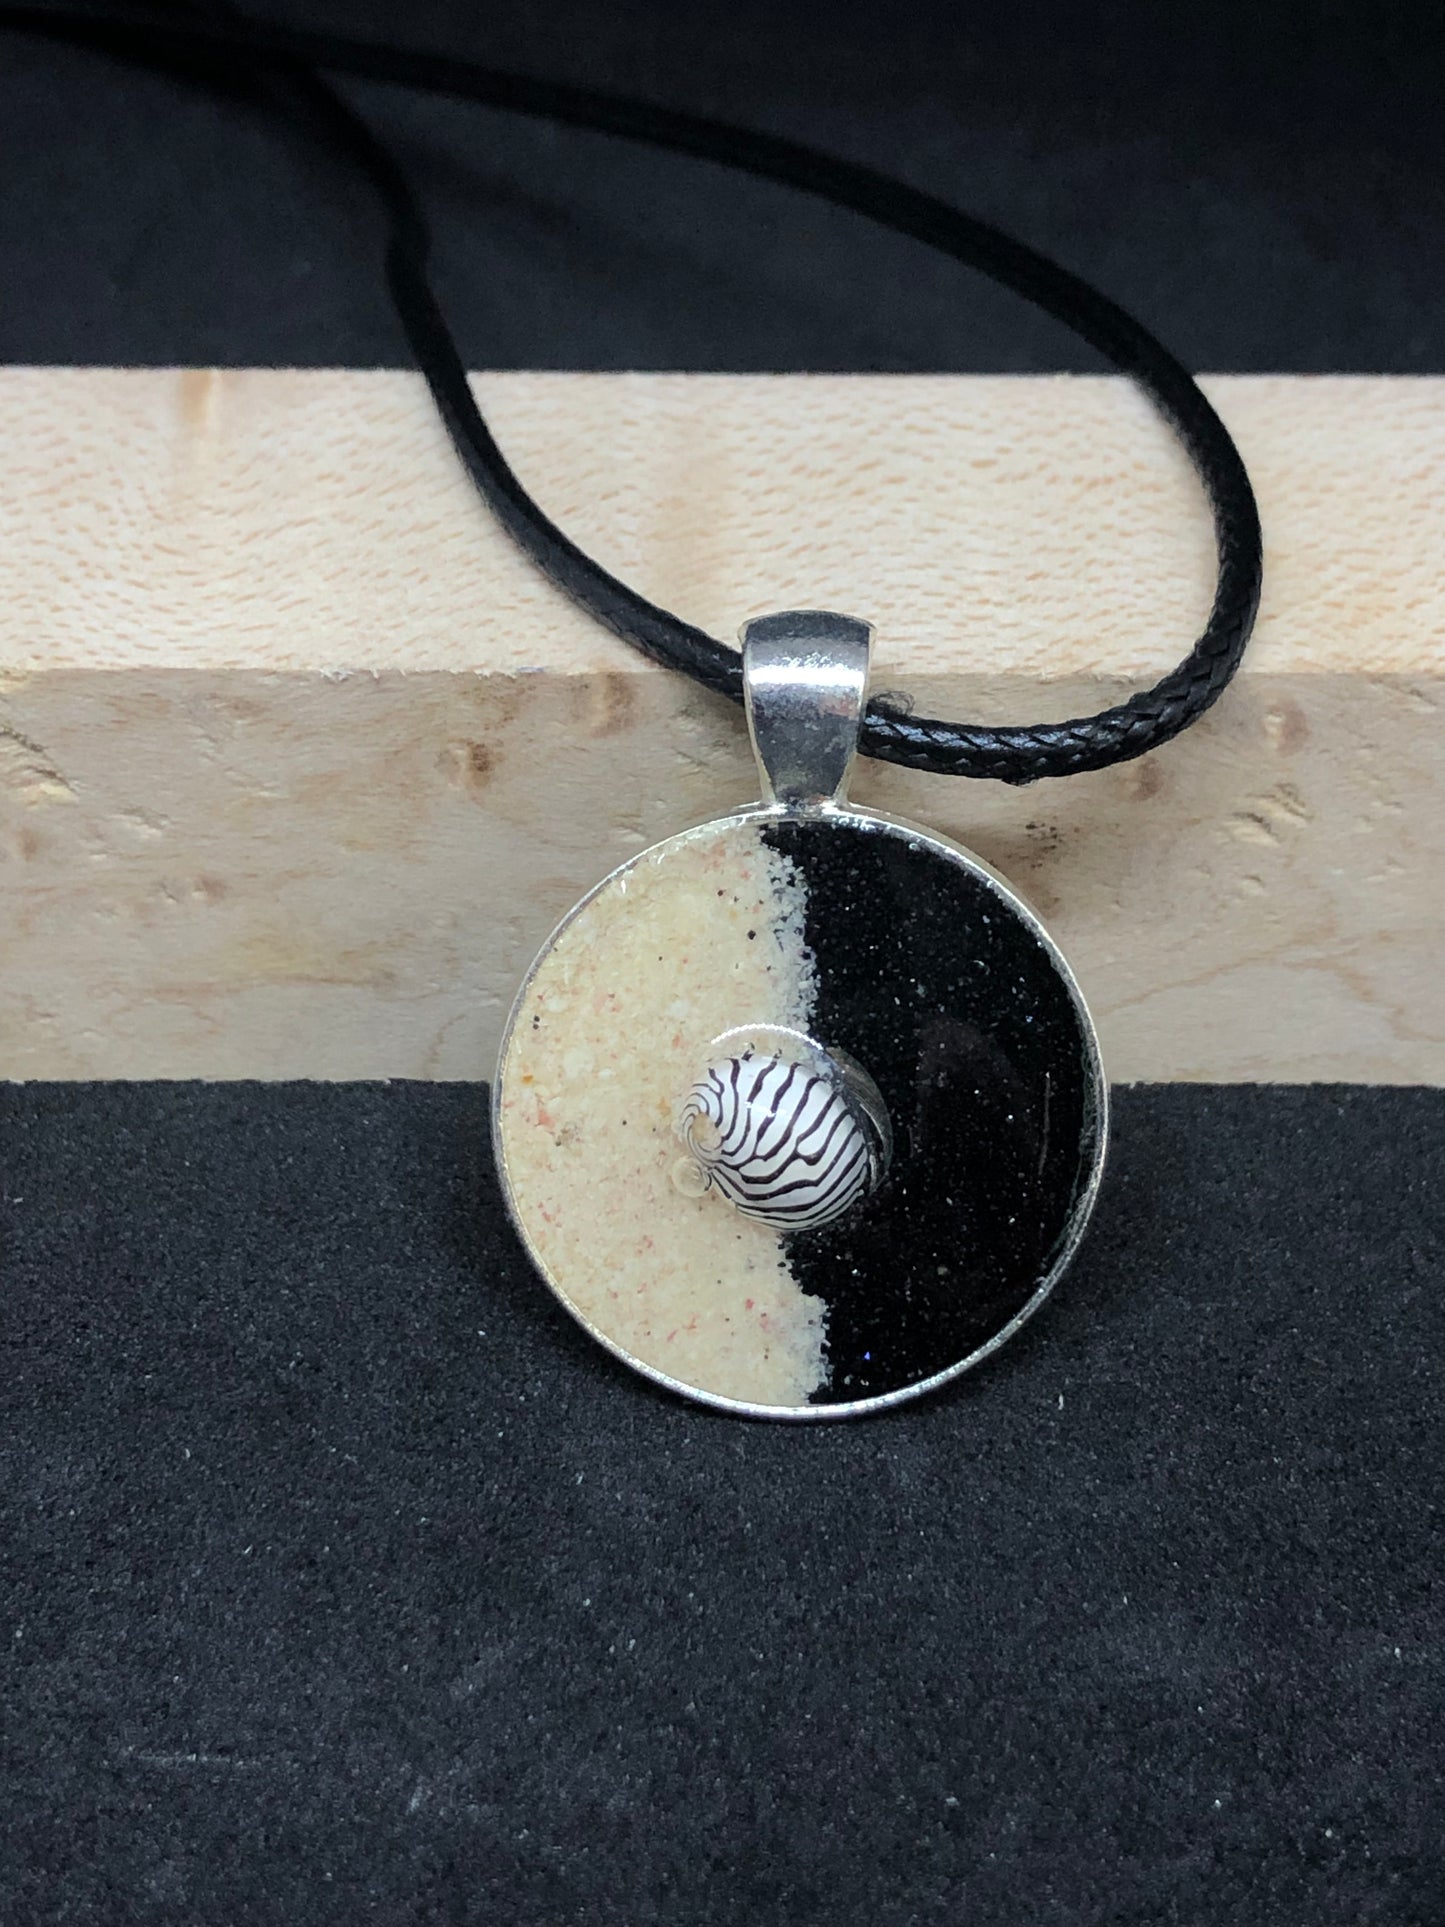 Seashell w/ Black and Pink Sand / Silver Pendant - Black Cord Necklace